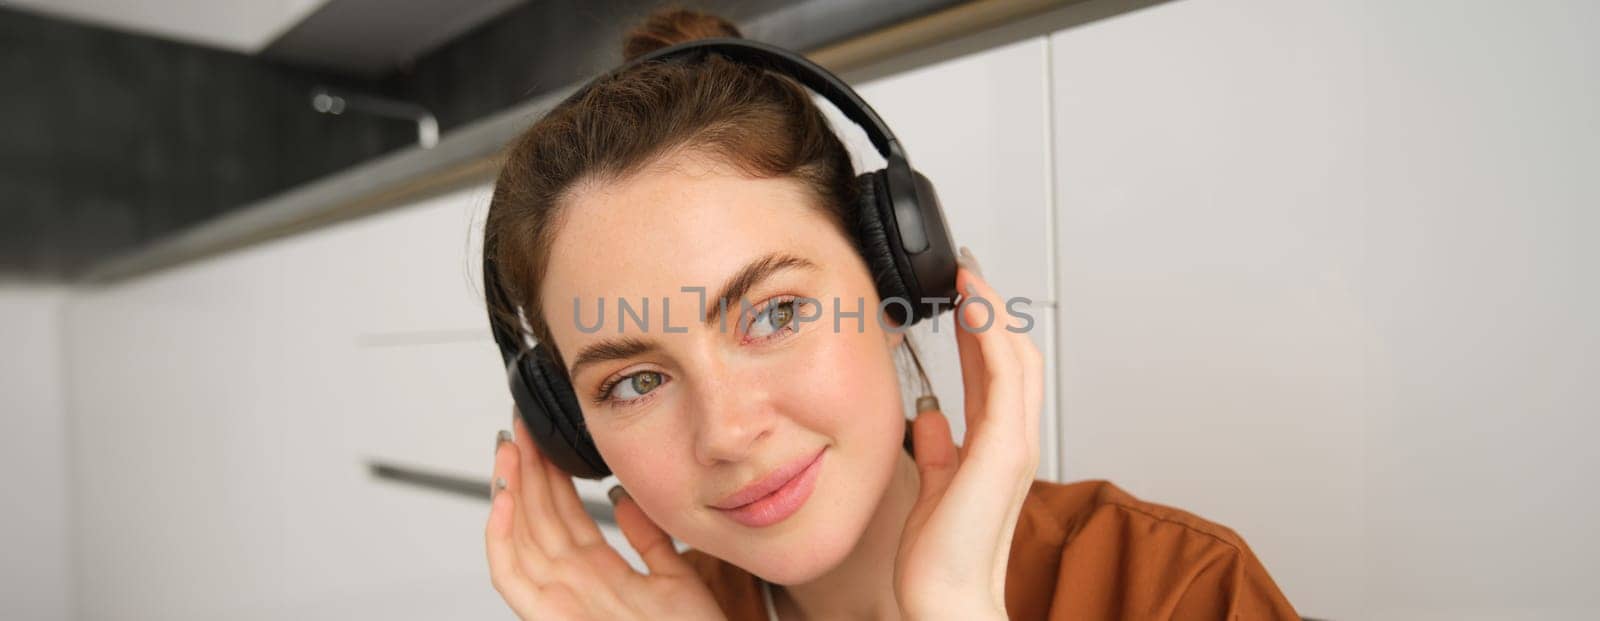 Close up shot of cute young woman in wireless headphones, listens to music and smiles, relaxes at home with favourite songs playing on her playlist.